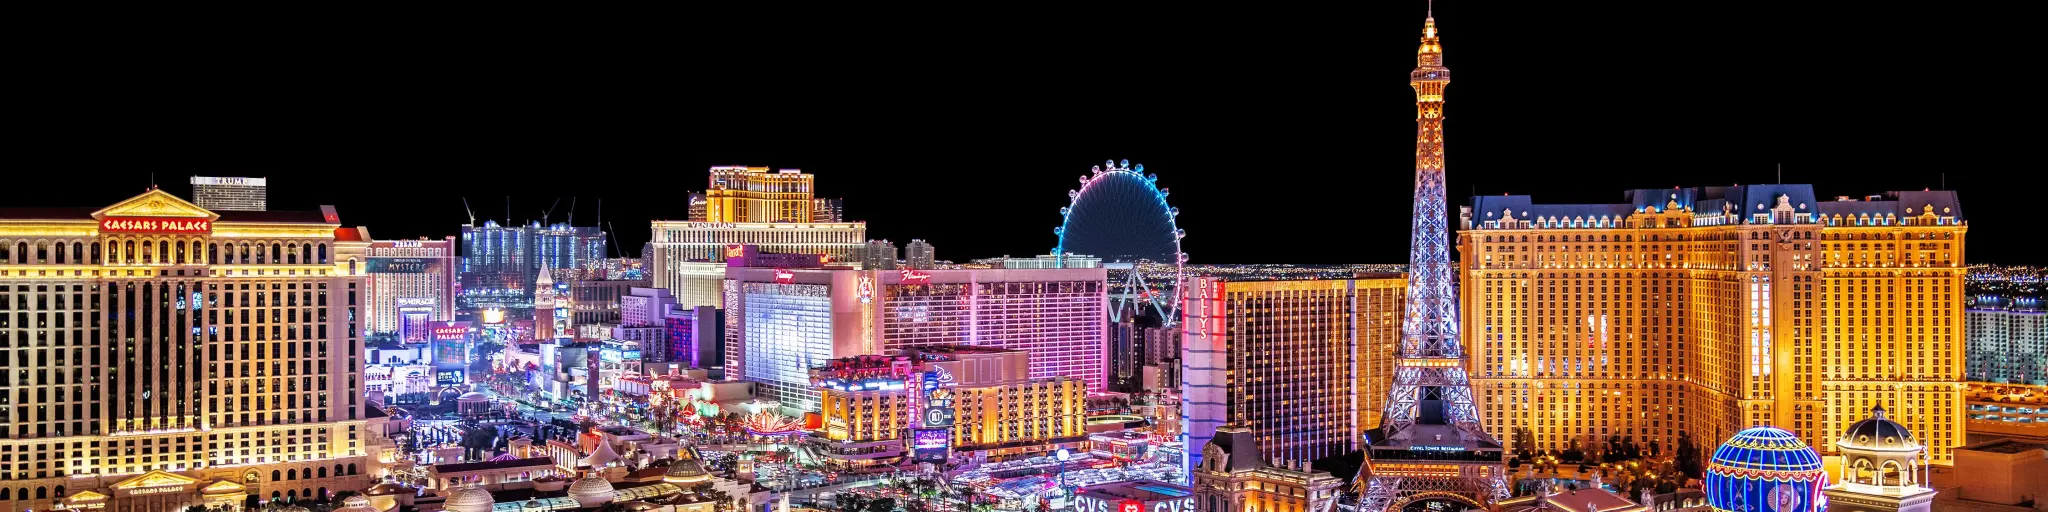 Panoramic view of the strip at night